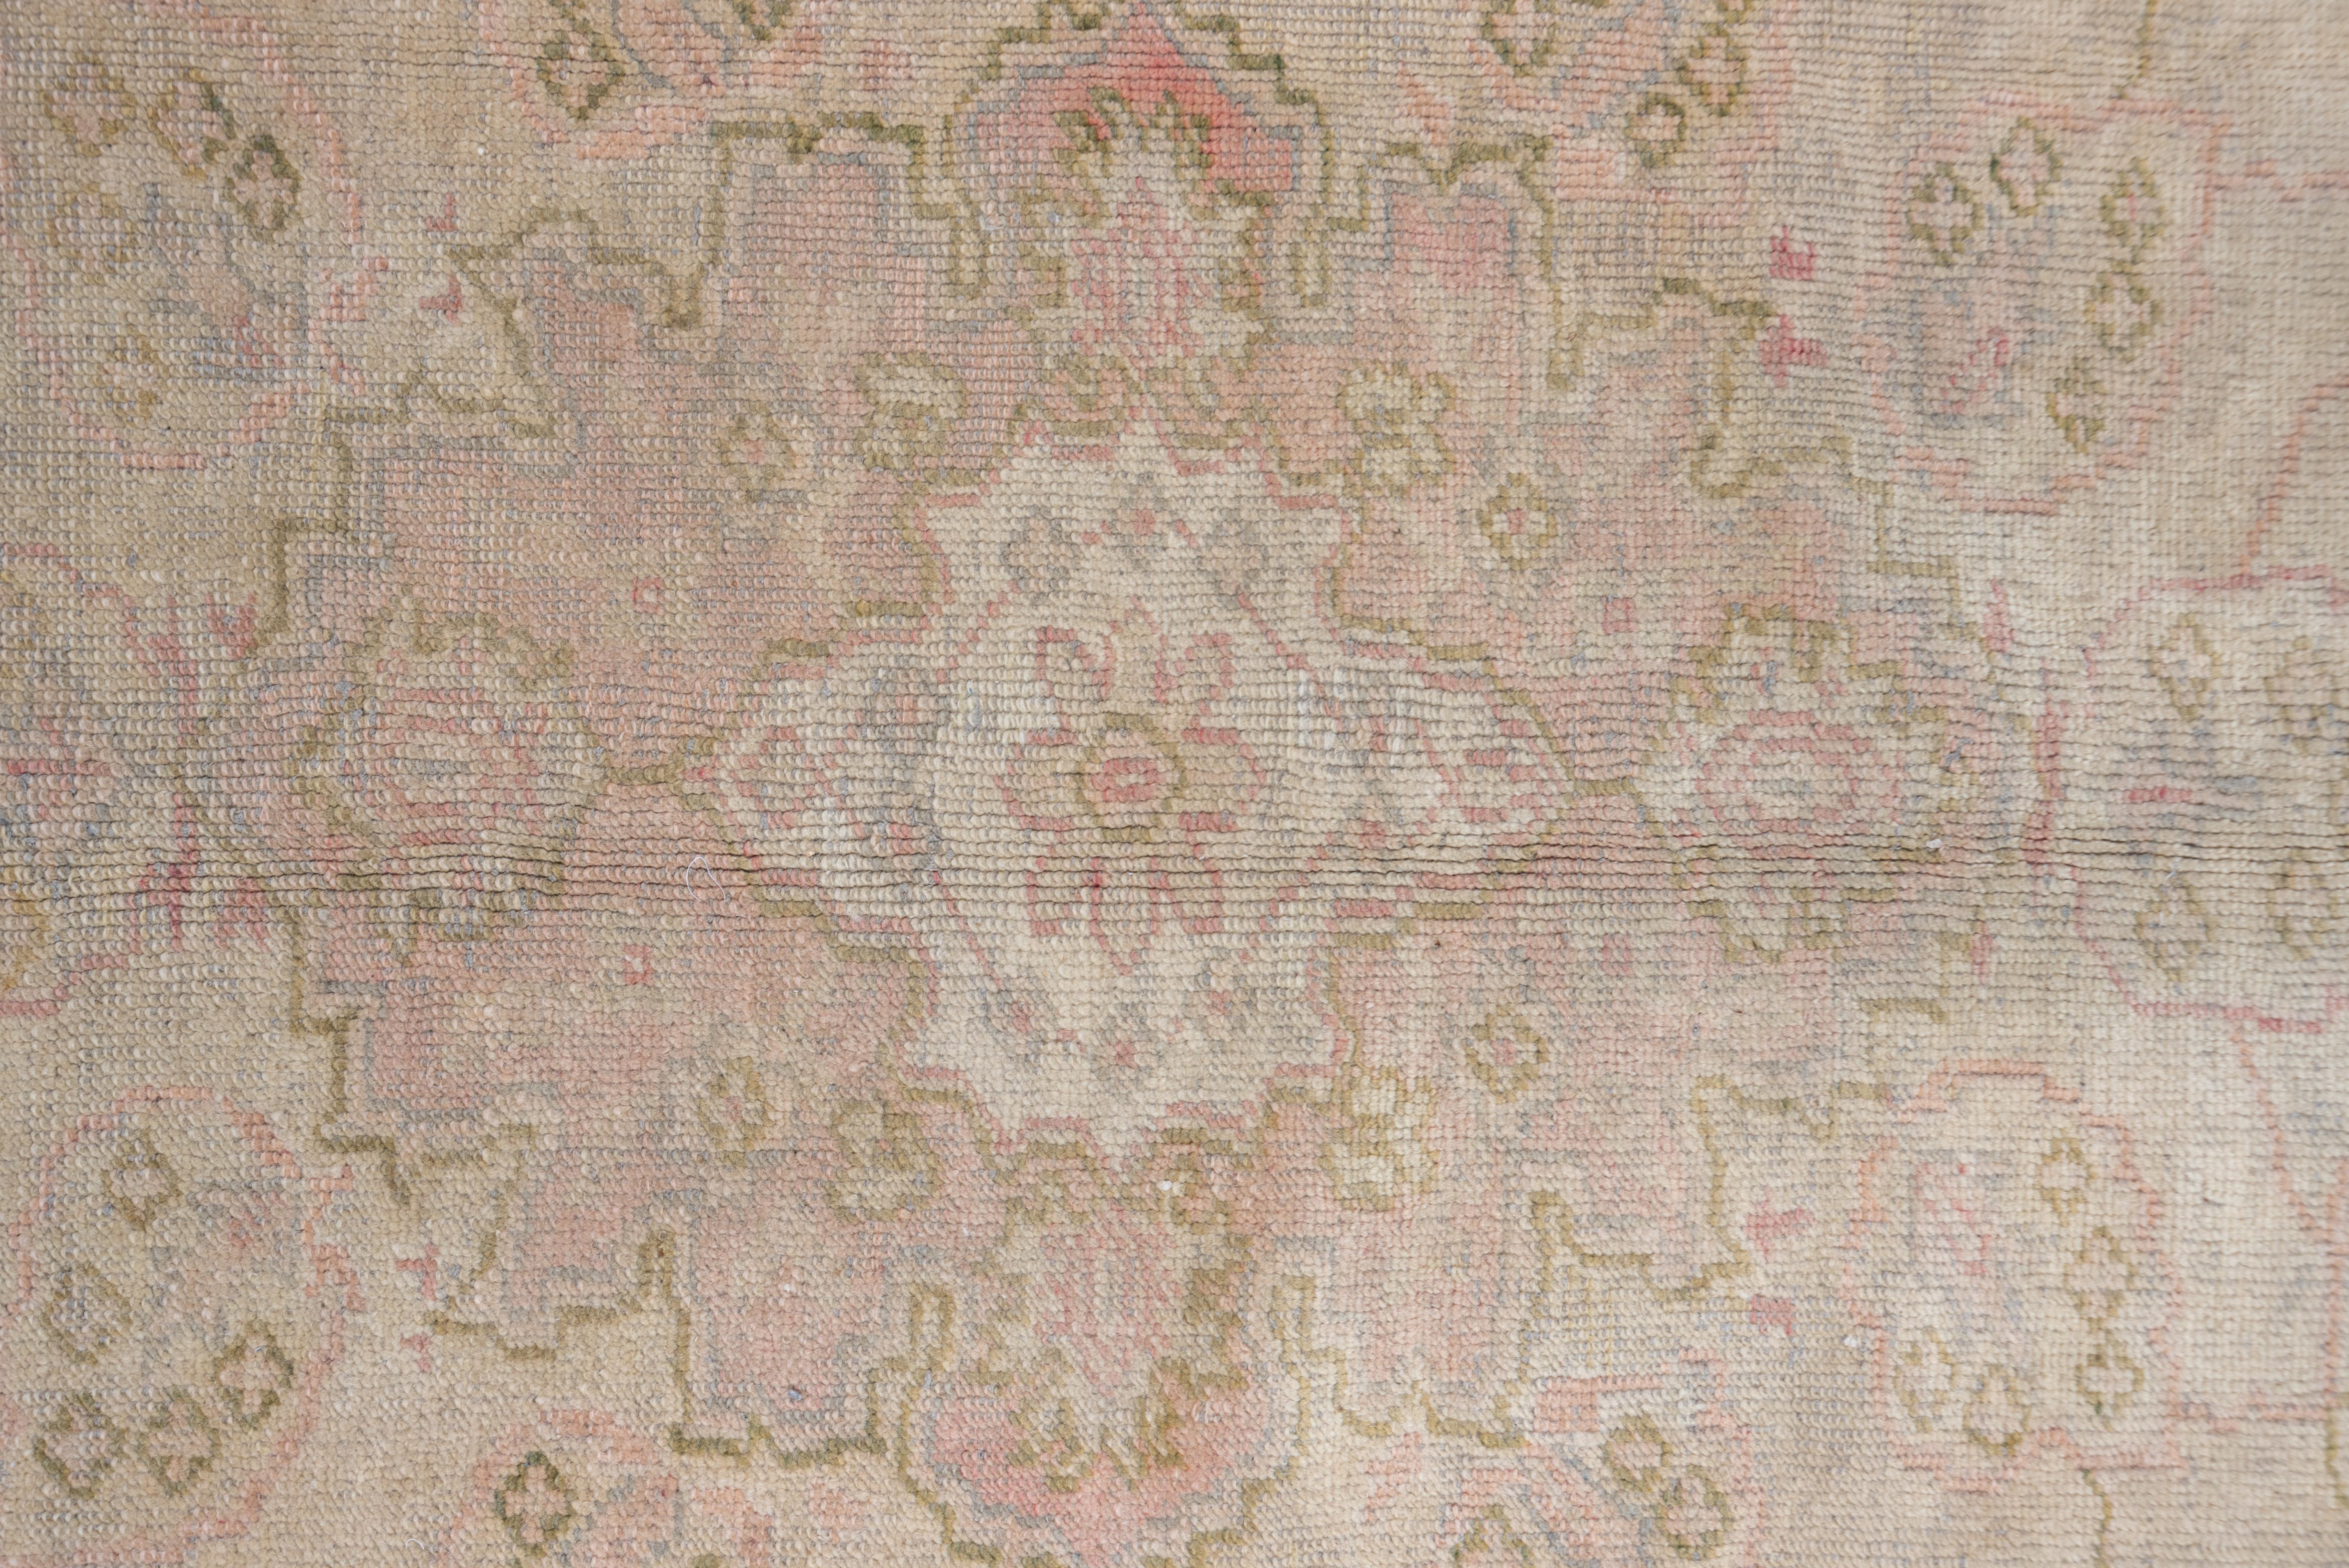 Wool Antique Turkish Oushak Rug with a Soft Palette, Light Purple and Pink Tones For Sale